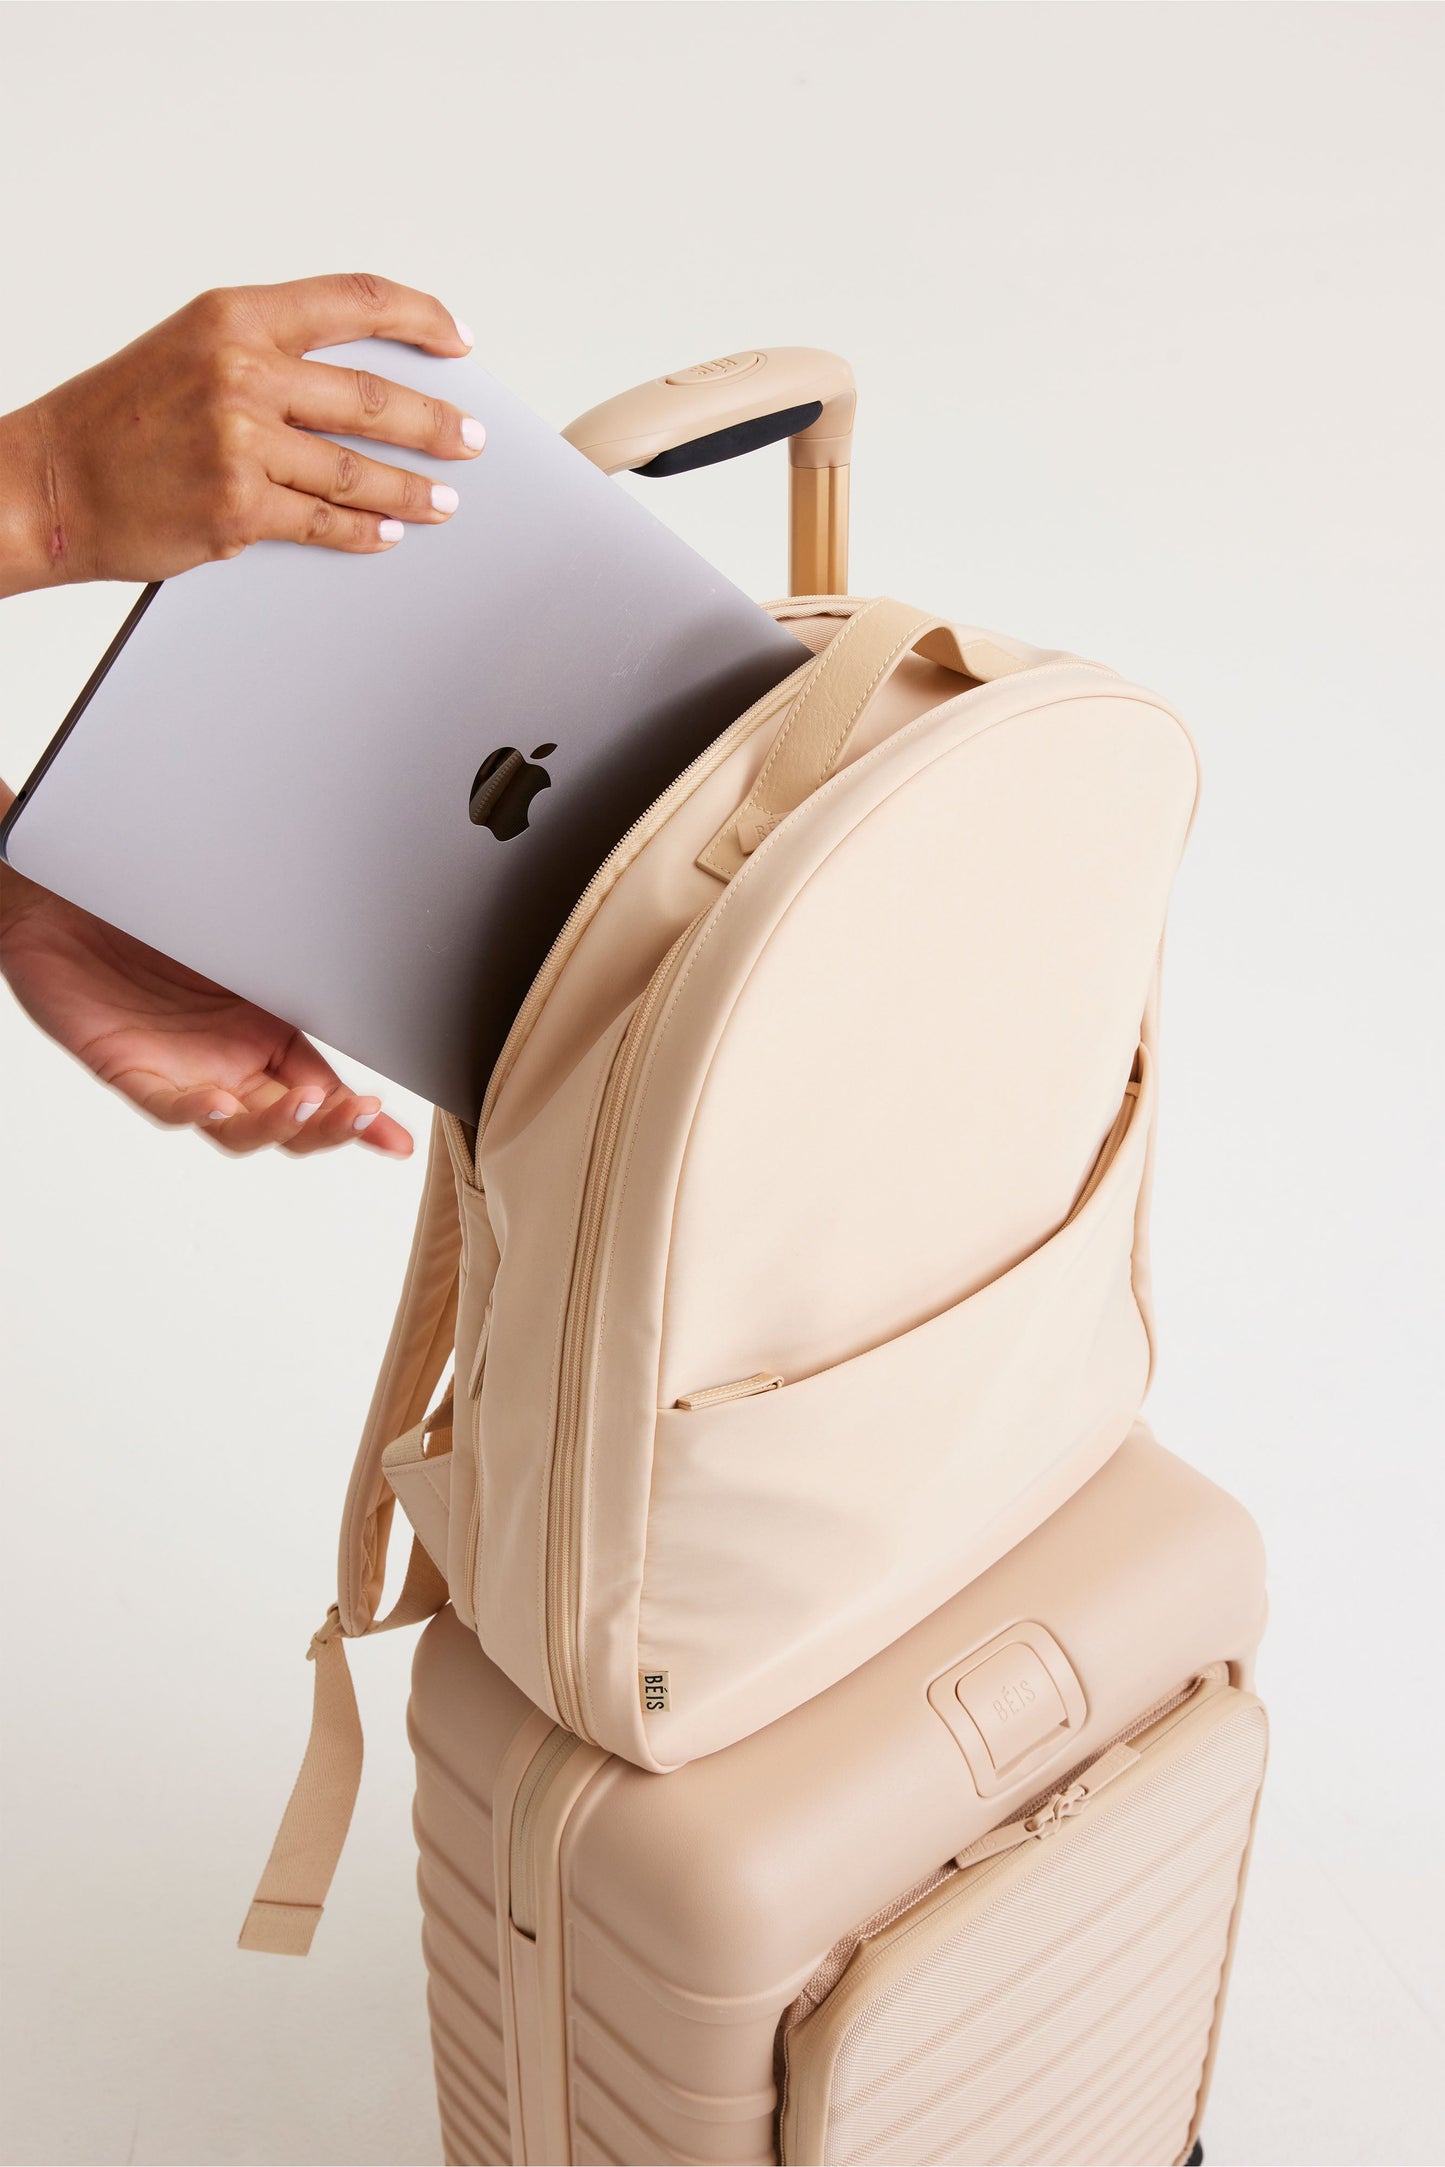 The Commuter Backpack In Beige